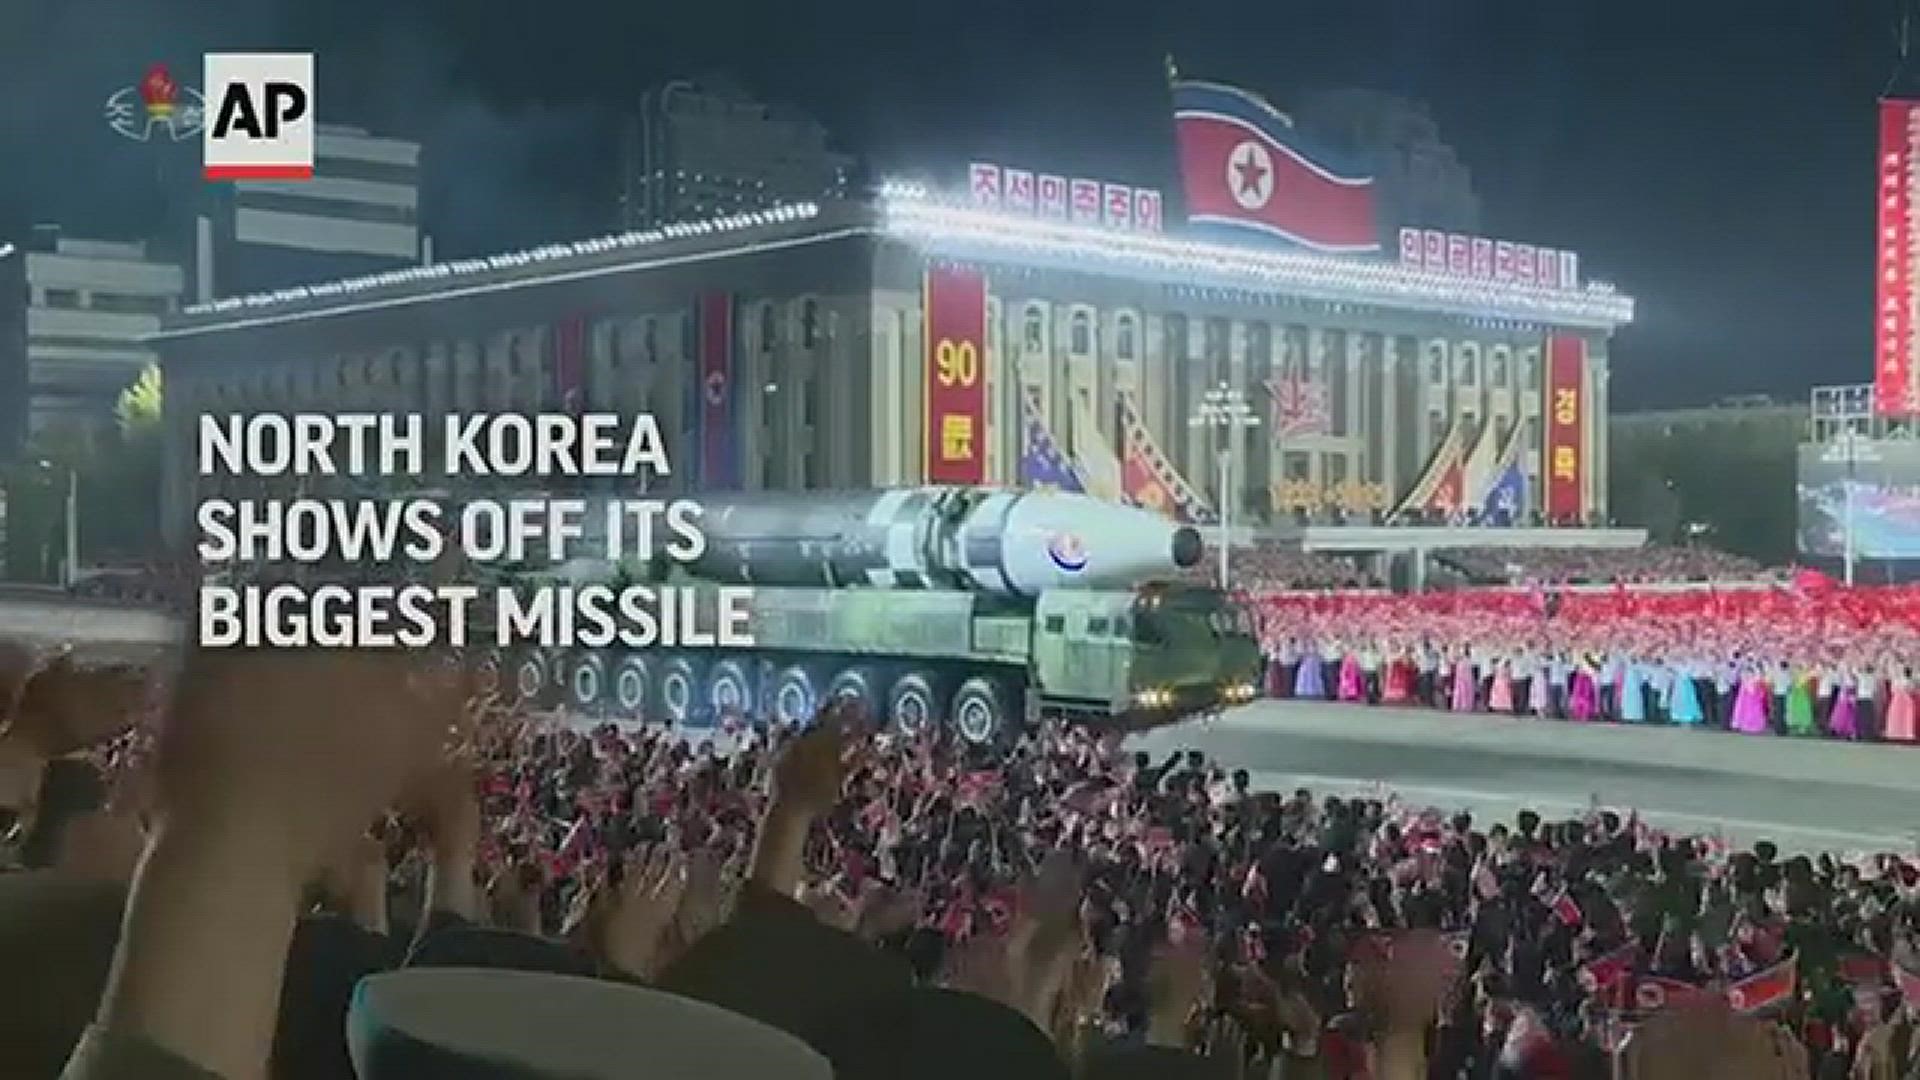 North Korean leader Kim Jong Un vowed to accelerate the development of nuclear weapons and threatened to use them, if provoked, in a speech at a military parade.